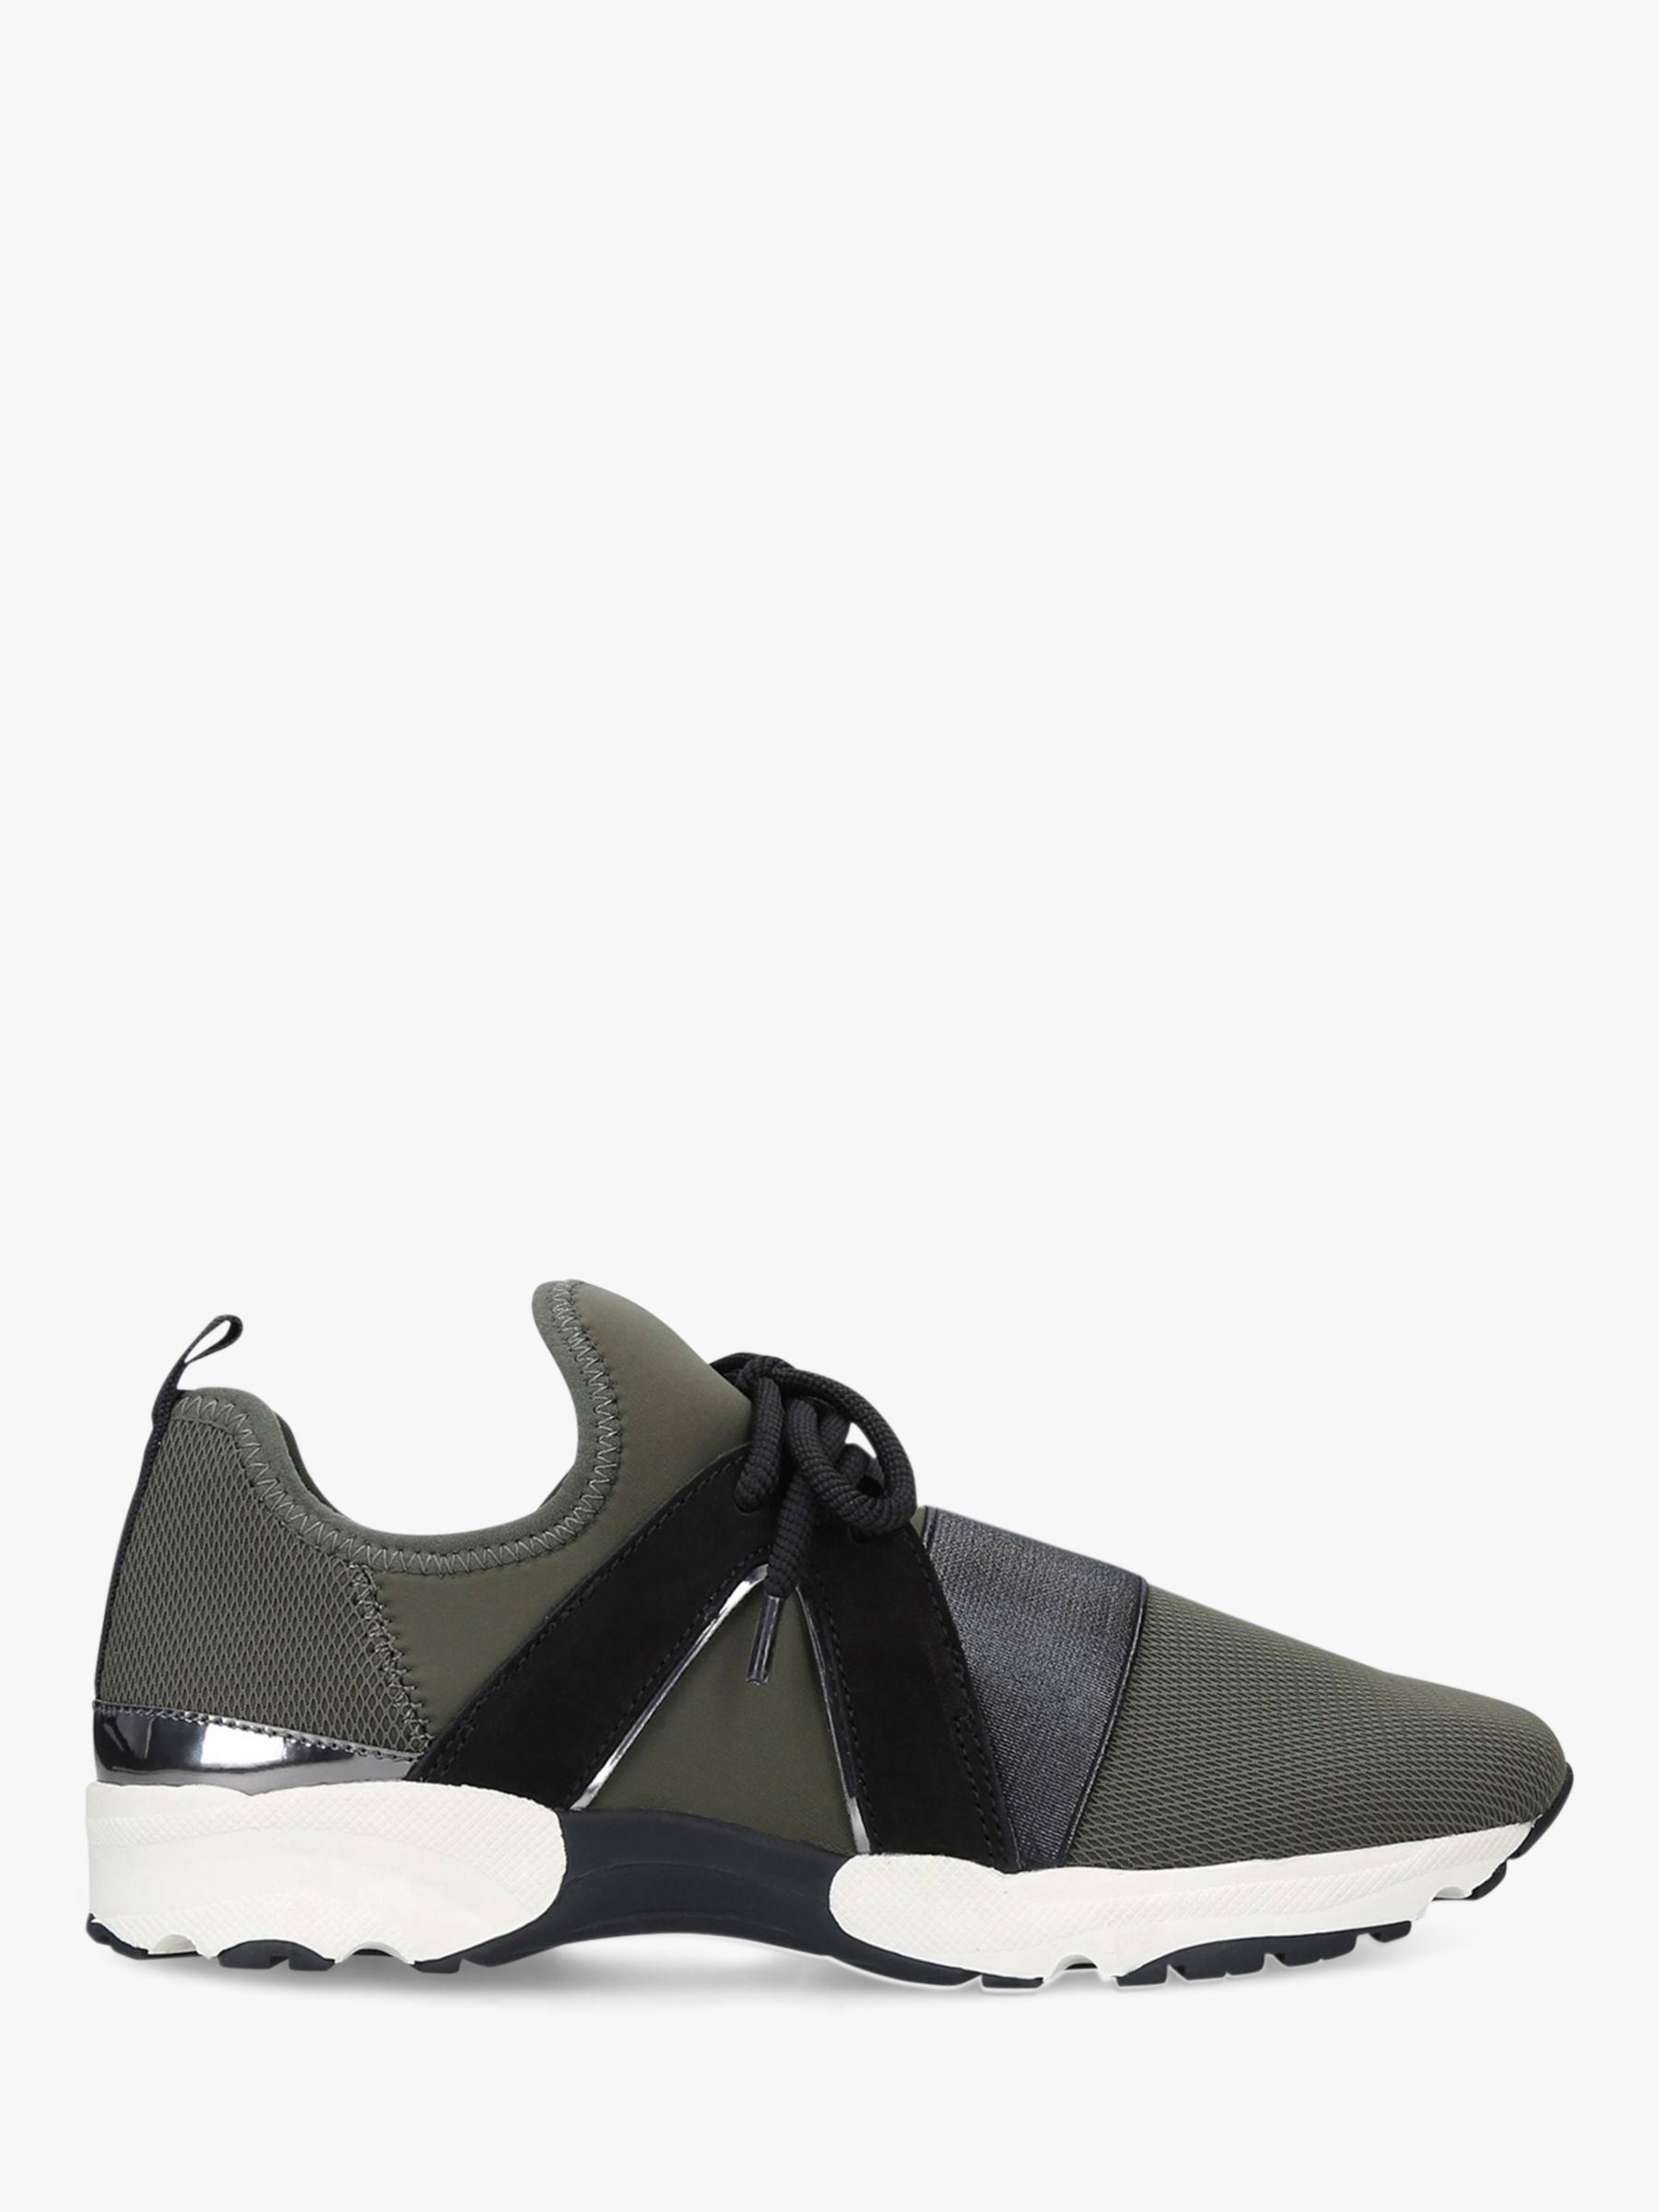 Carvela Lament Lace Up Trainers, Green 